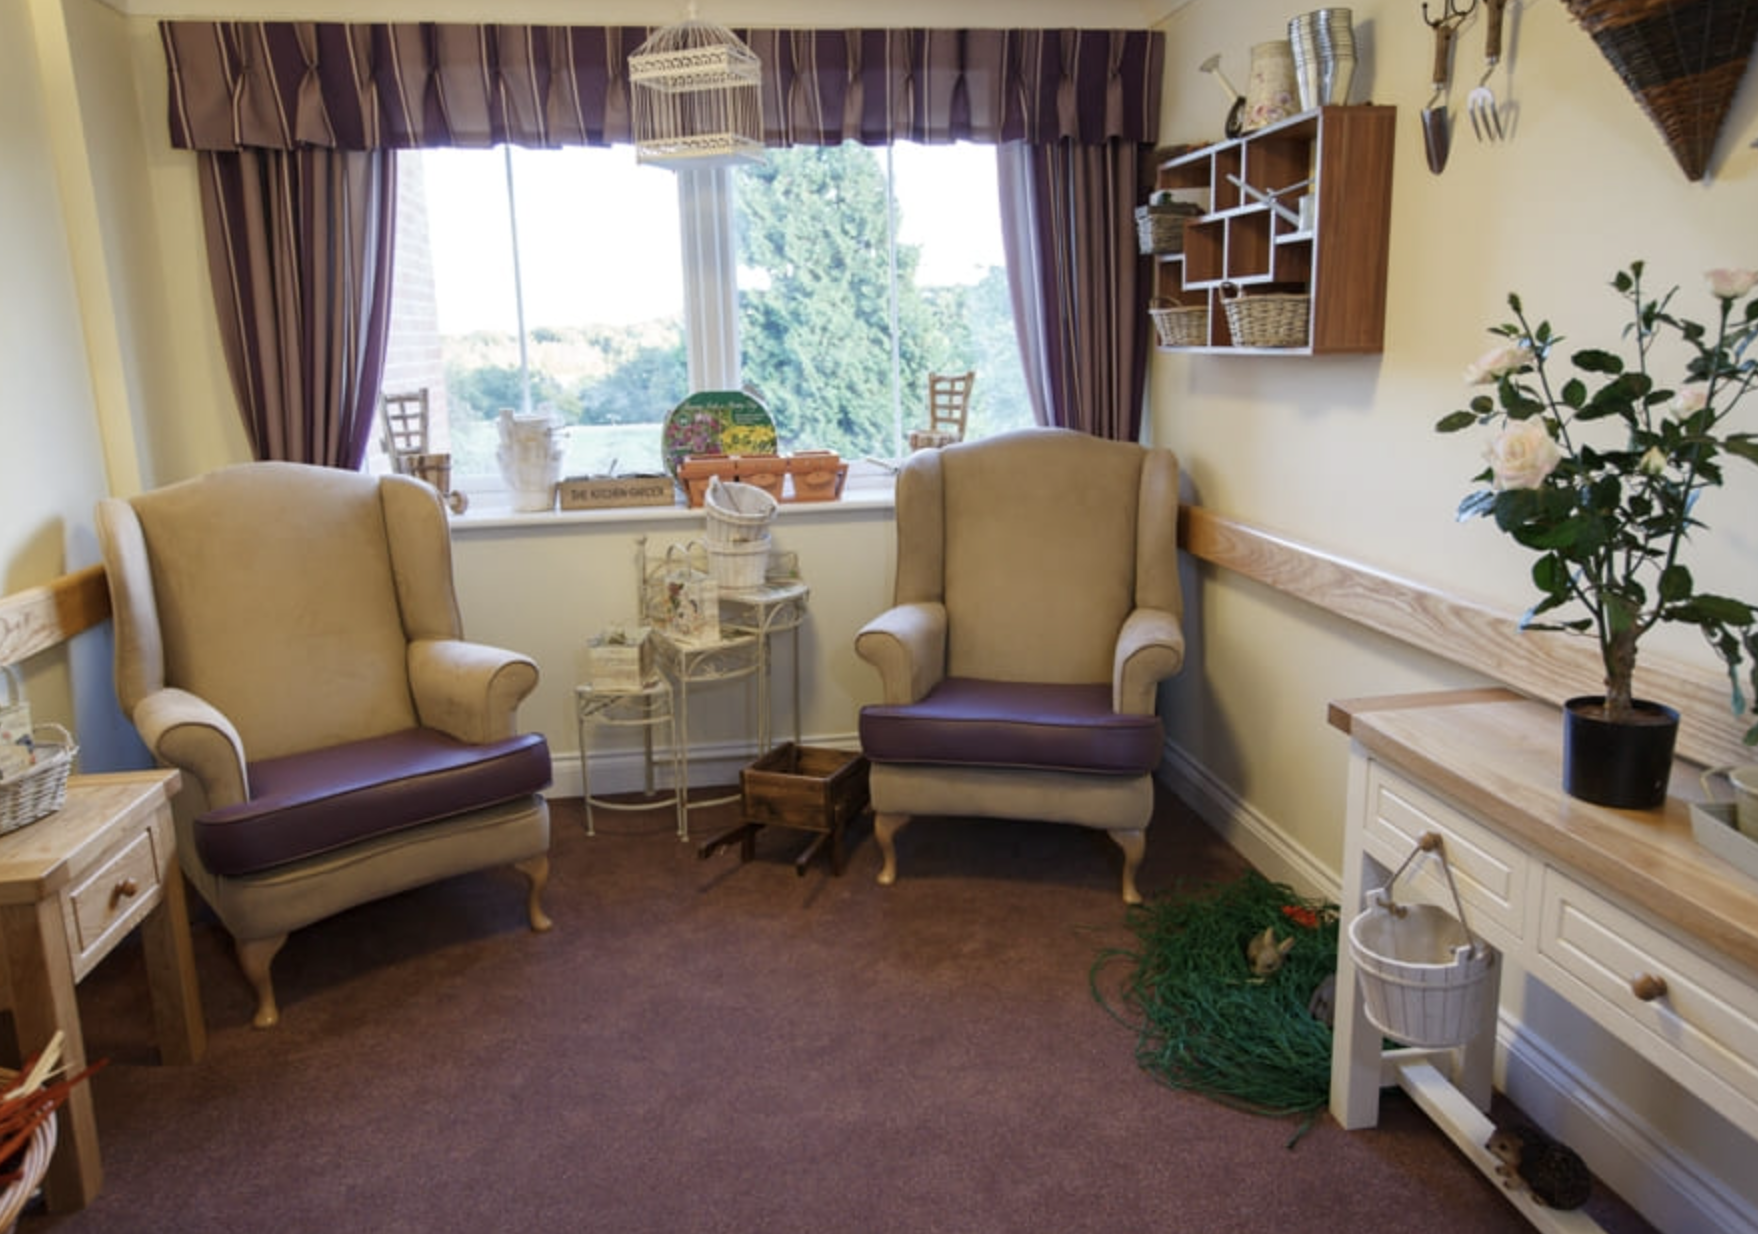 Seating area of Cooperscroft care home in Potters Bar, Hertfordshire